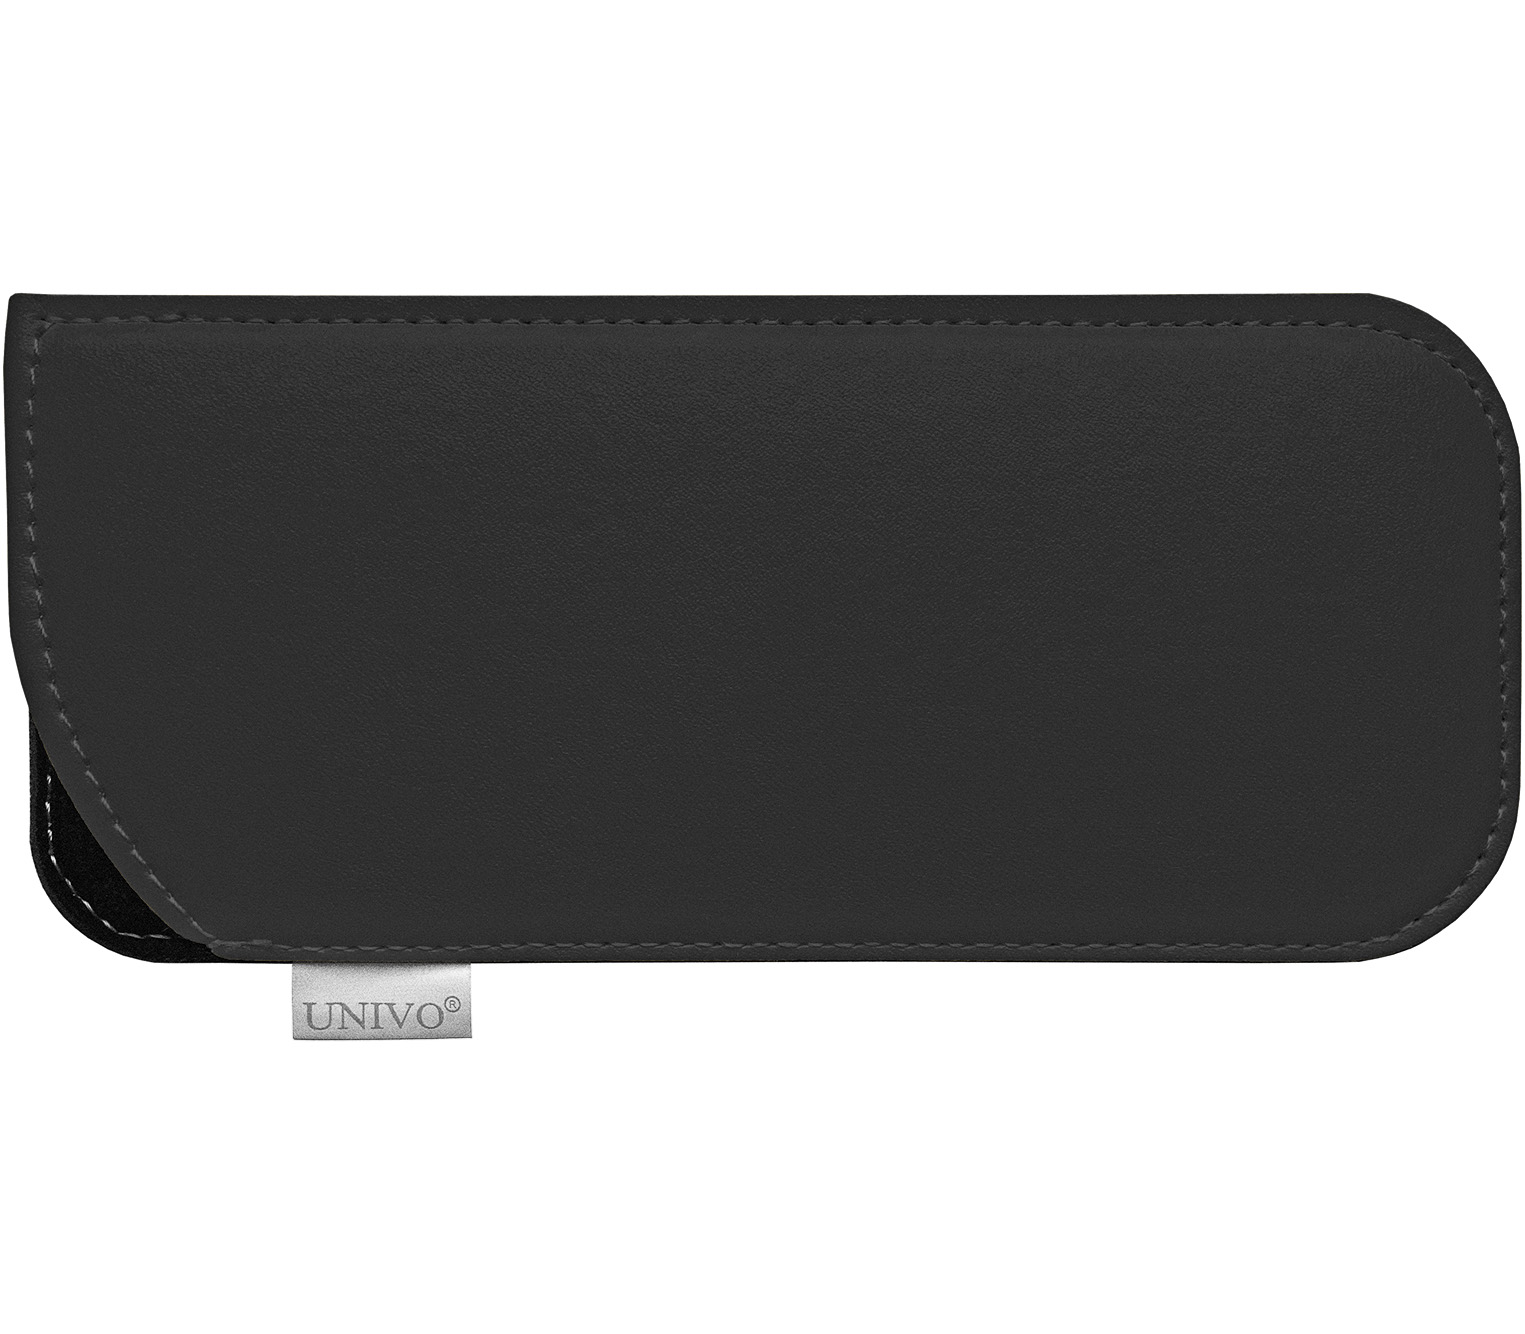 Main Image (Angle) - Brooks (Black) Glasses Pouches Accessories